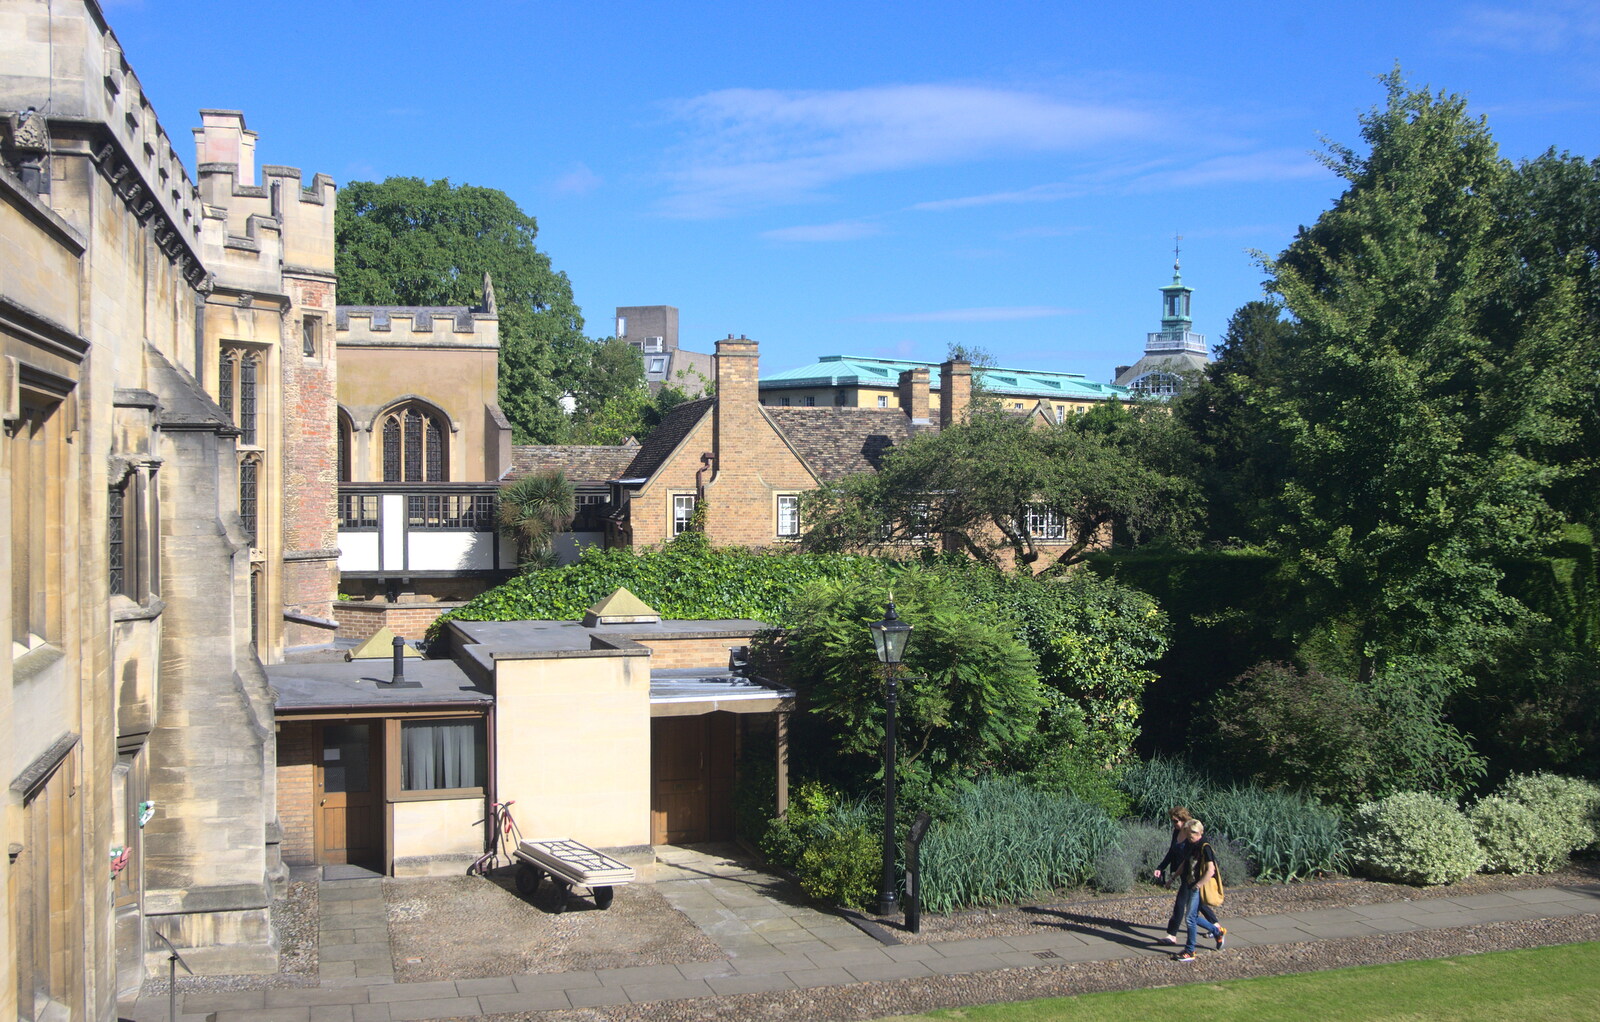 The view from an upstairs window from Back in the 'Bridge: an Anniversary, Cambridge - 3rd July 2016